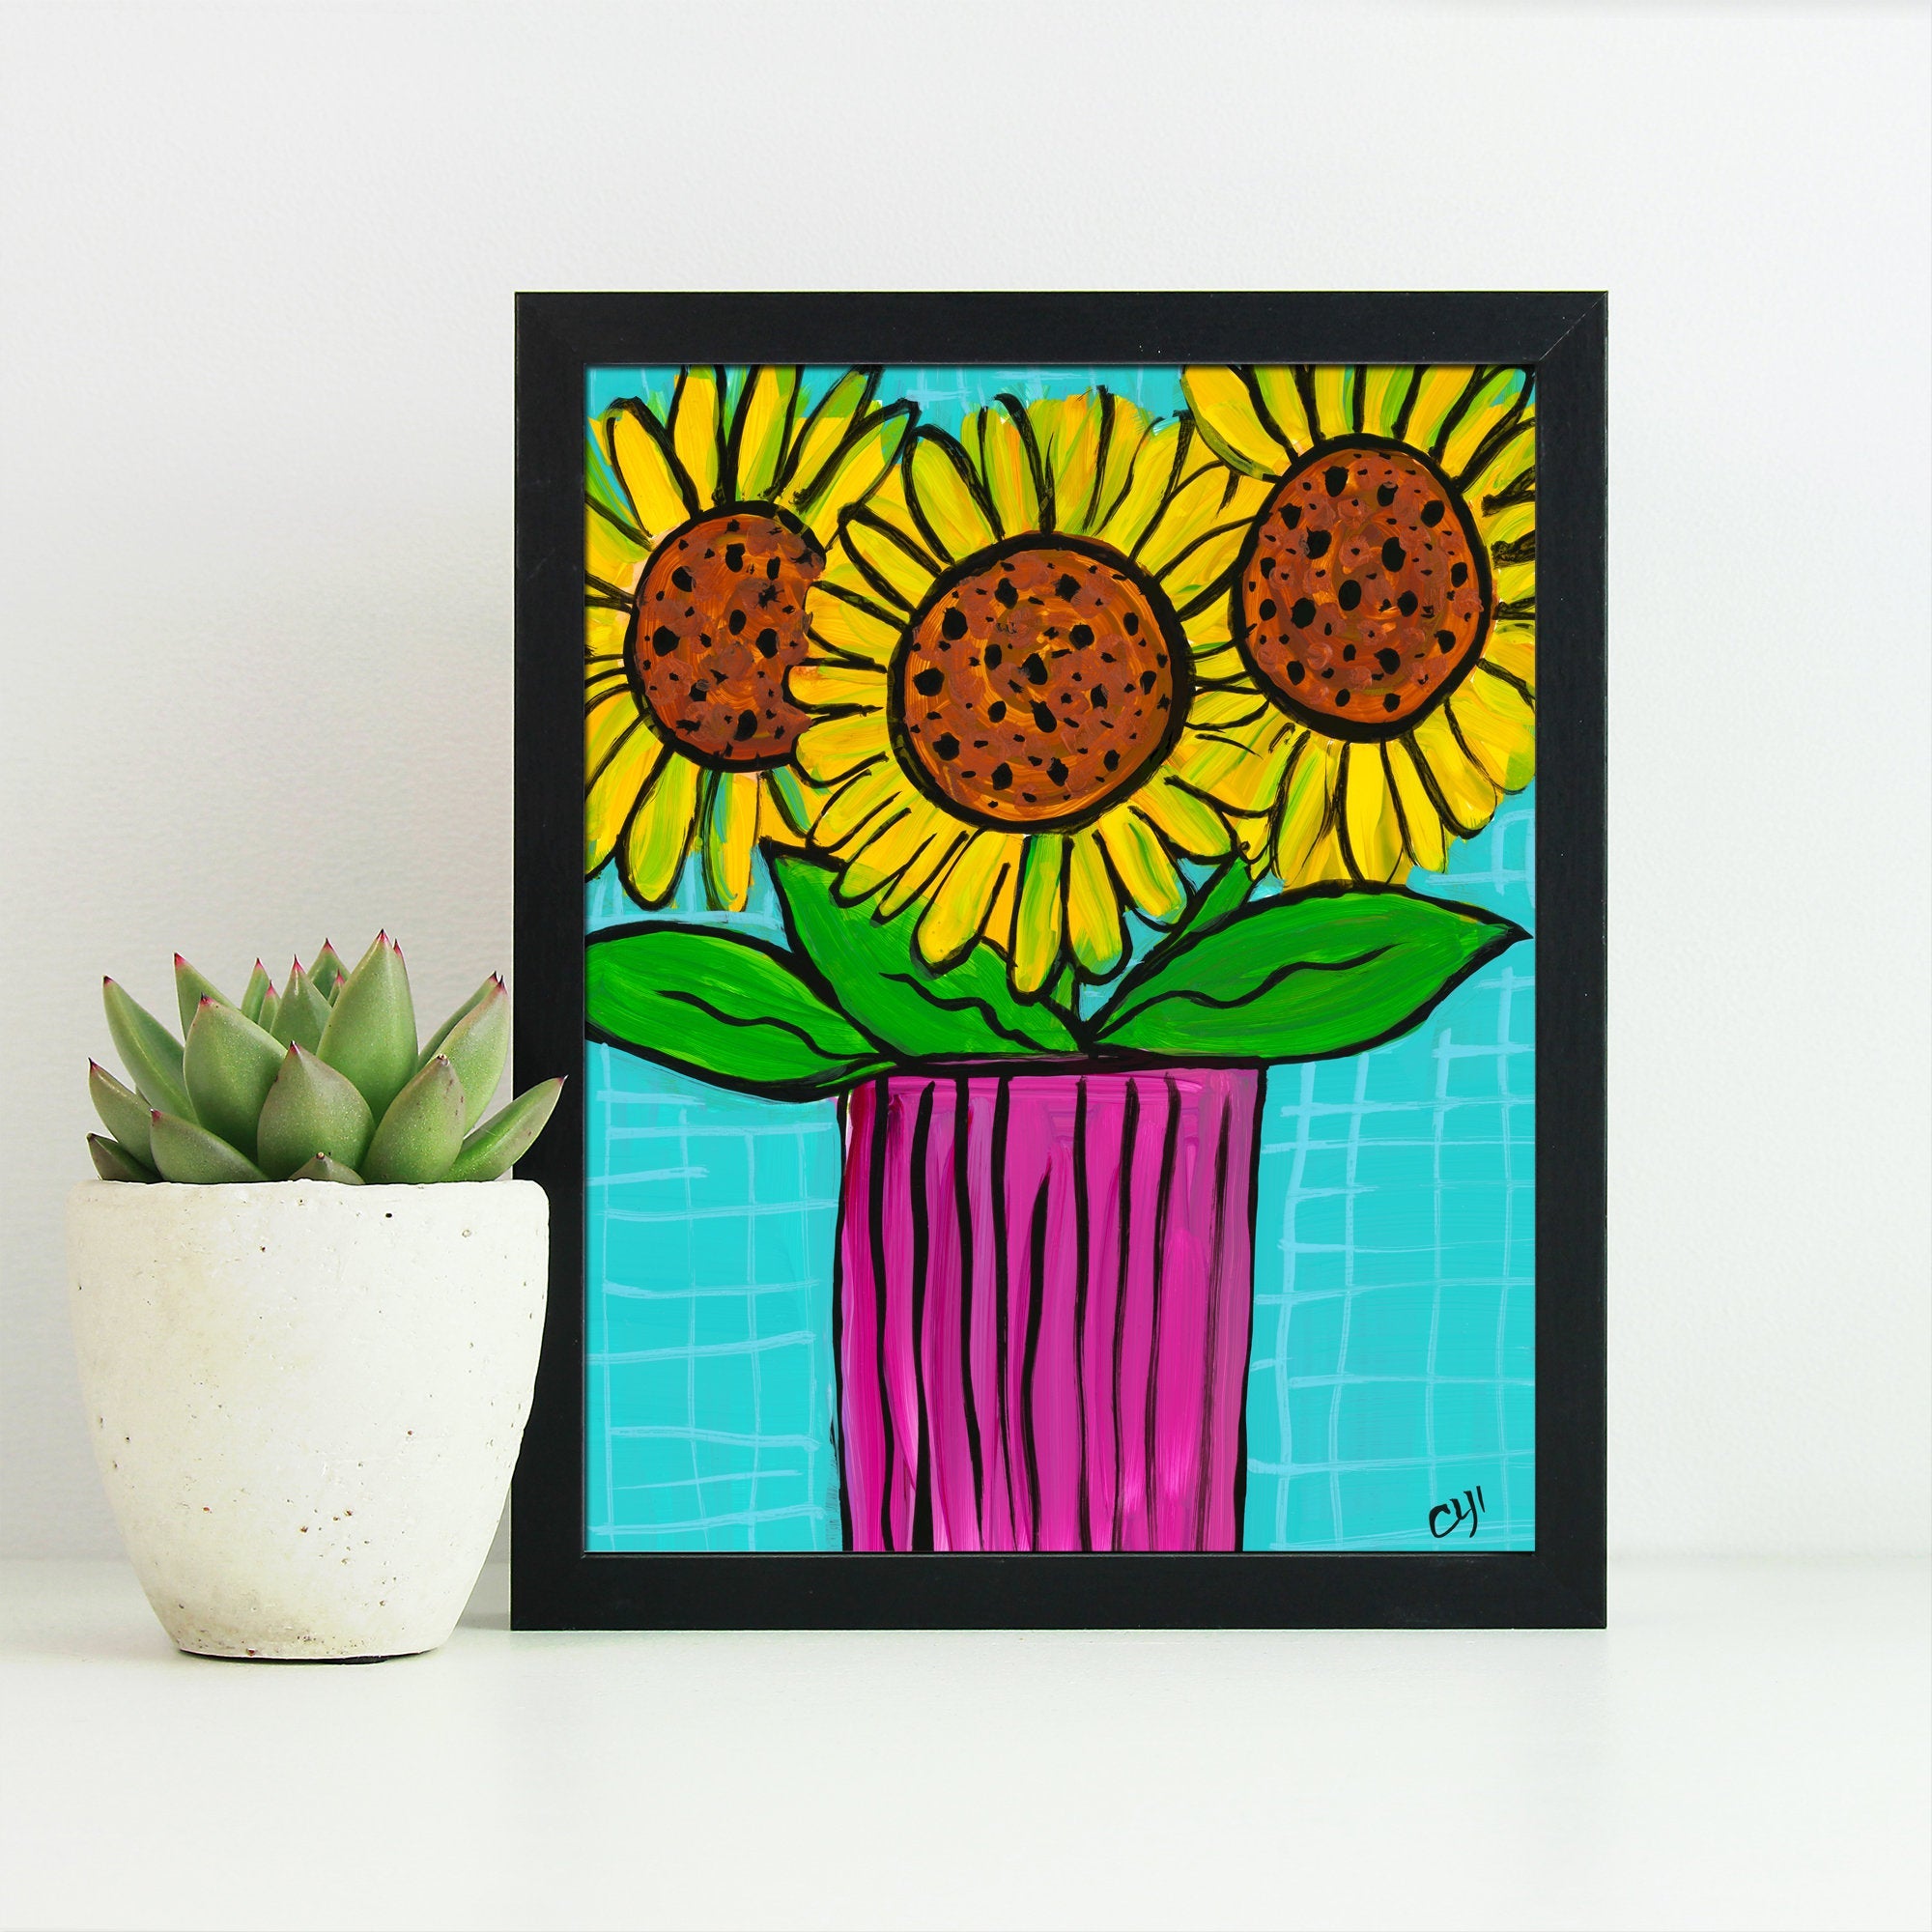 Sunflower Art Print - Sun Flower Print - Happy Floral Still Life with Vase - 8x10 inches with optional black mat by Claudine Intner